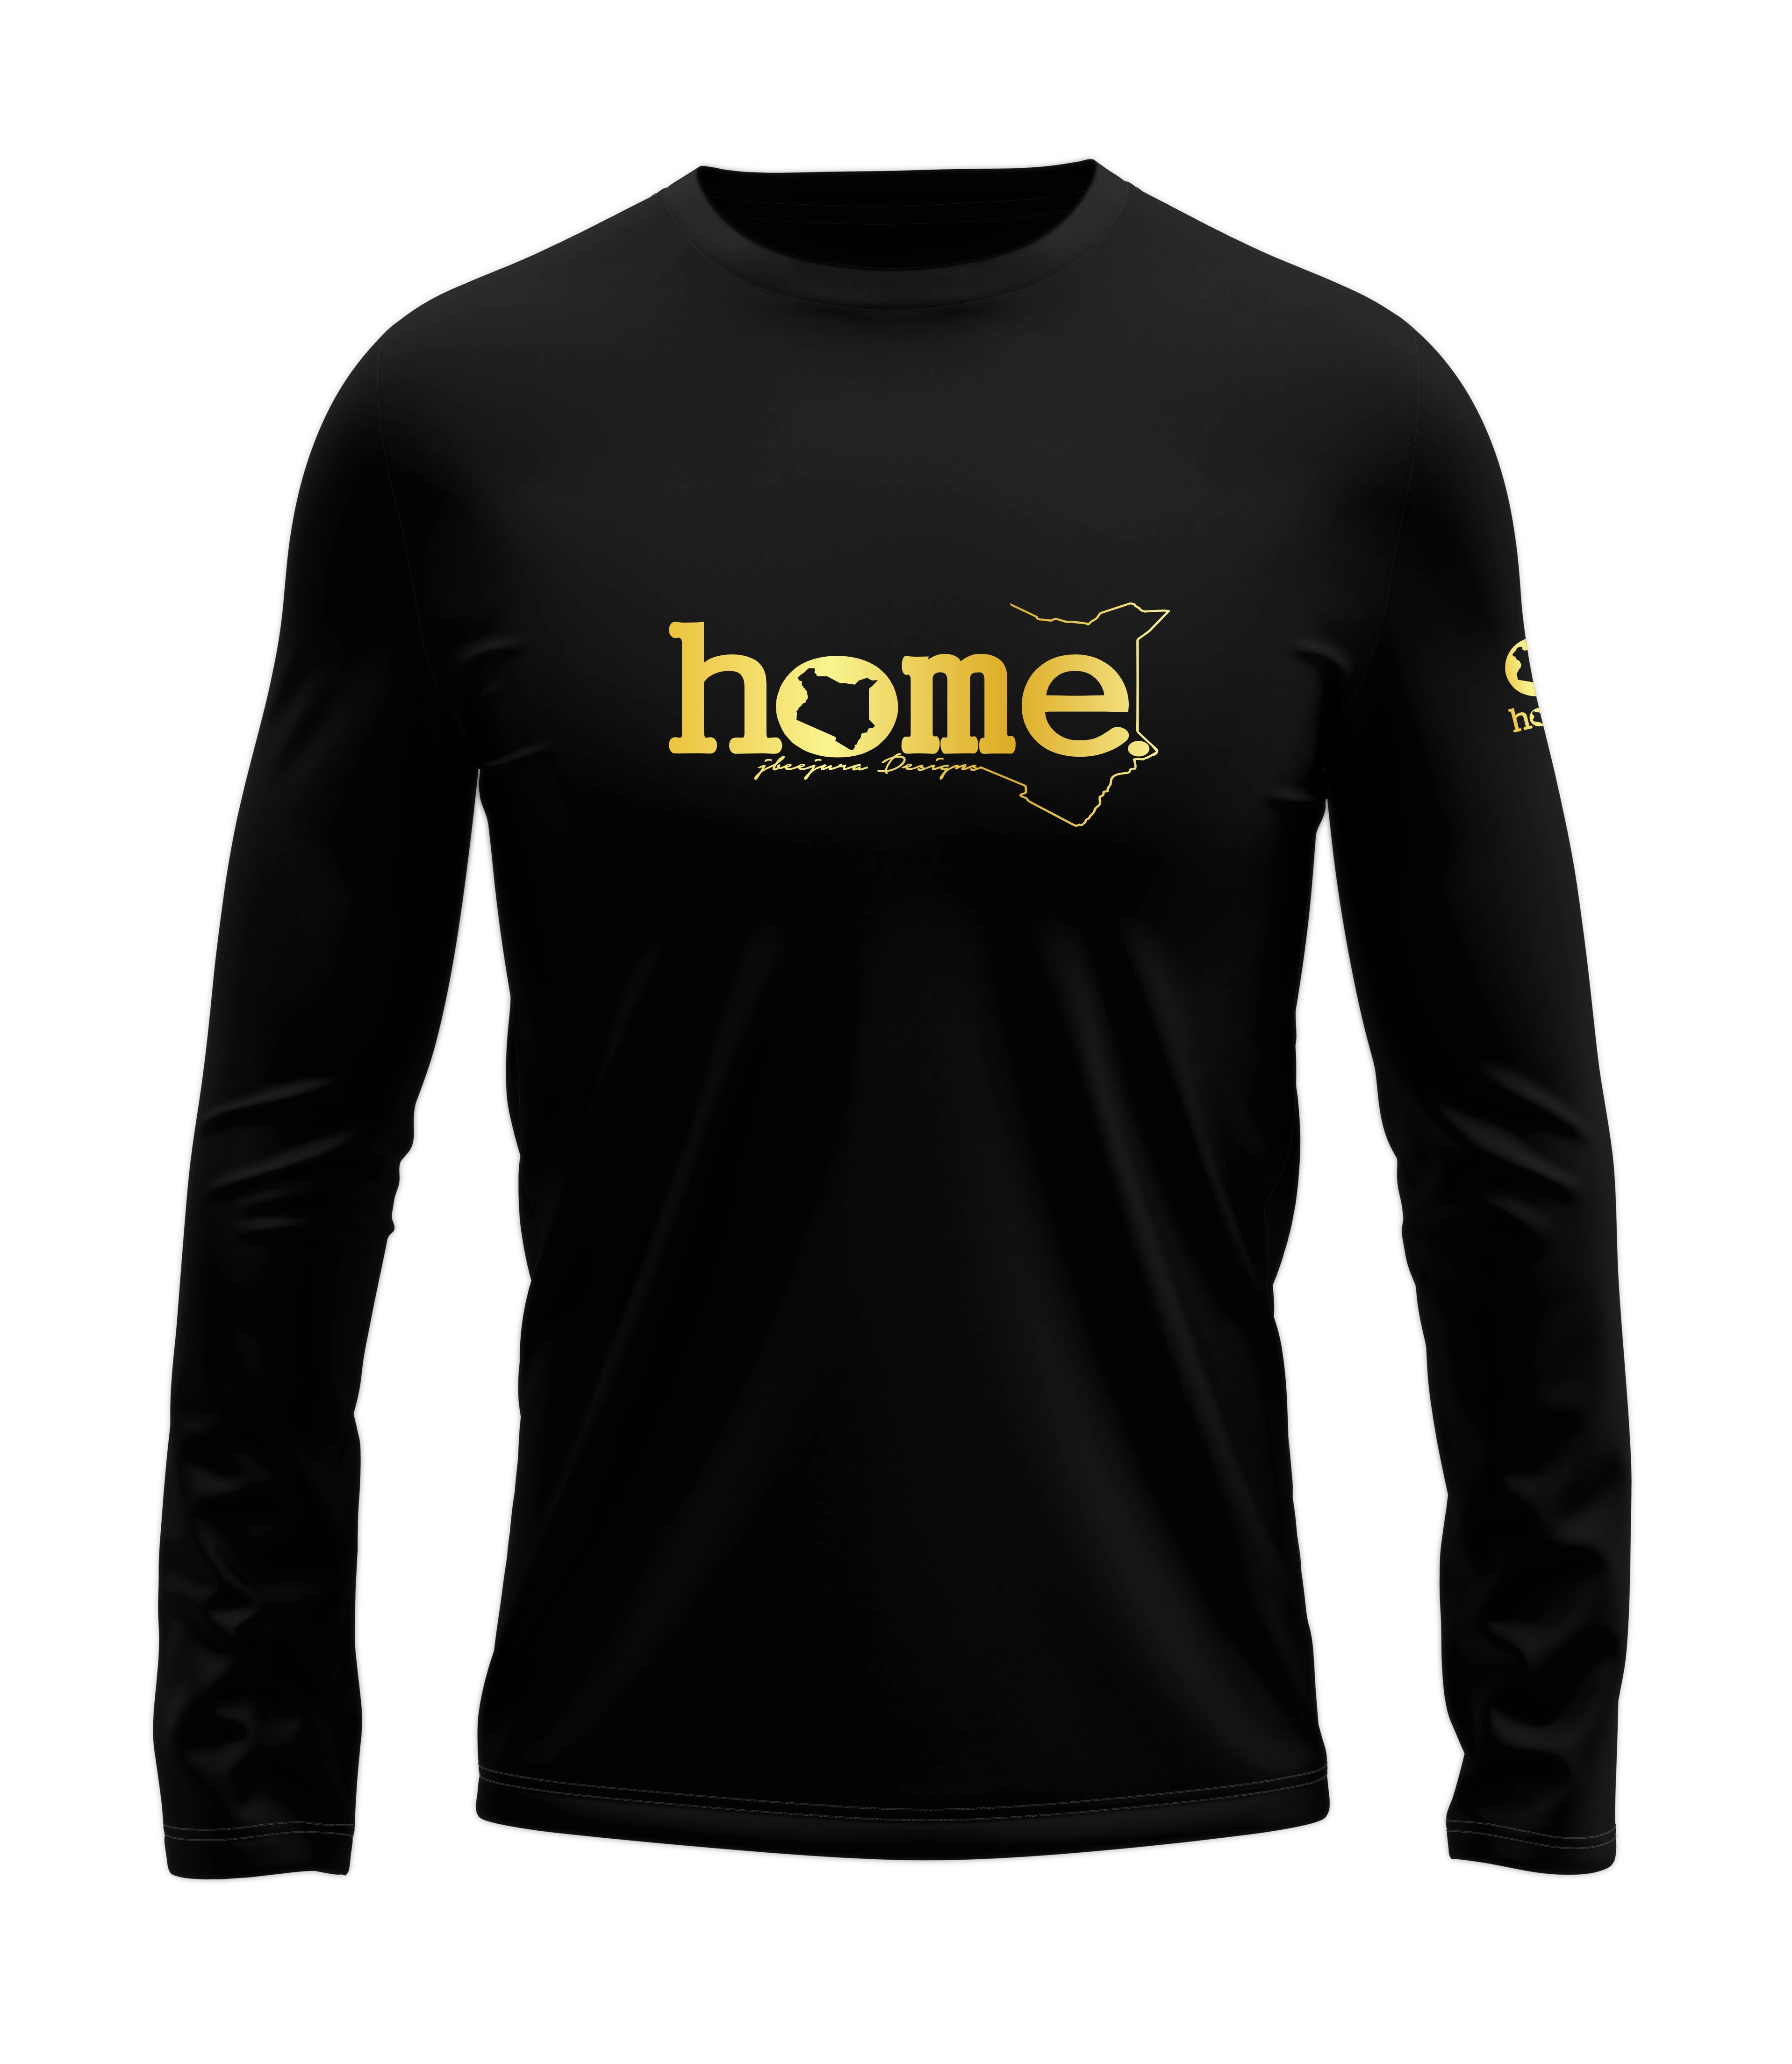 home_254 LONG-SLEEVED BLACK T-SHIRT WITH A GOLD CLASSIC WORDS PRINT – COTTON PLUS FABRIC